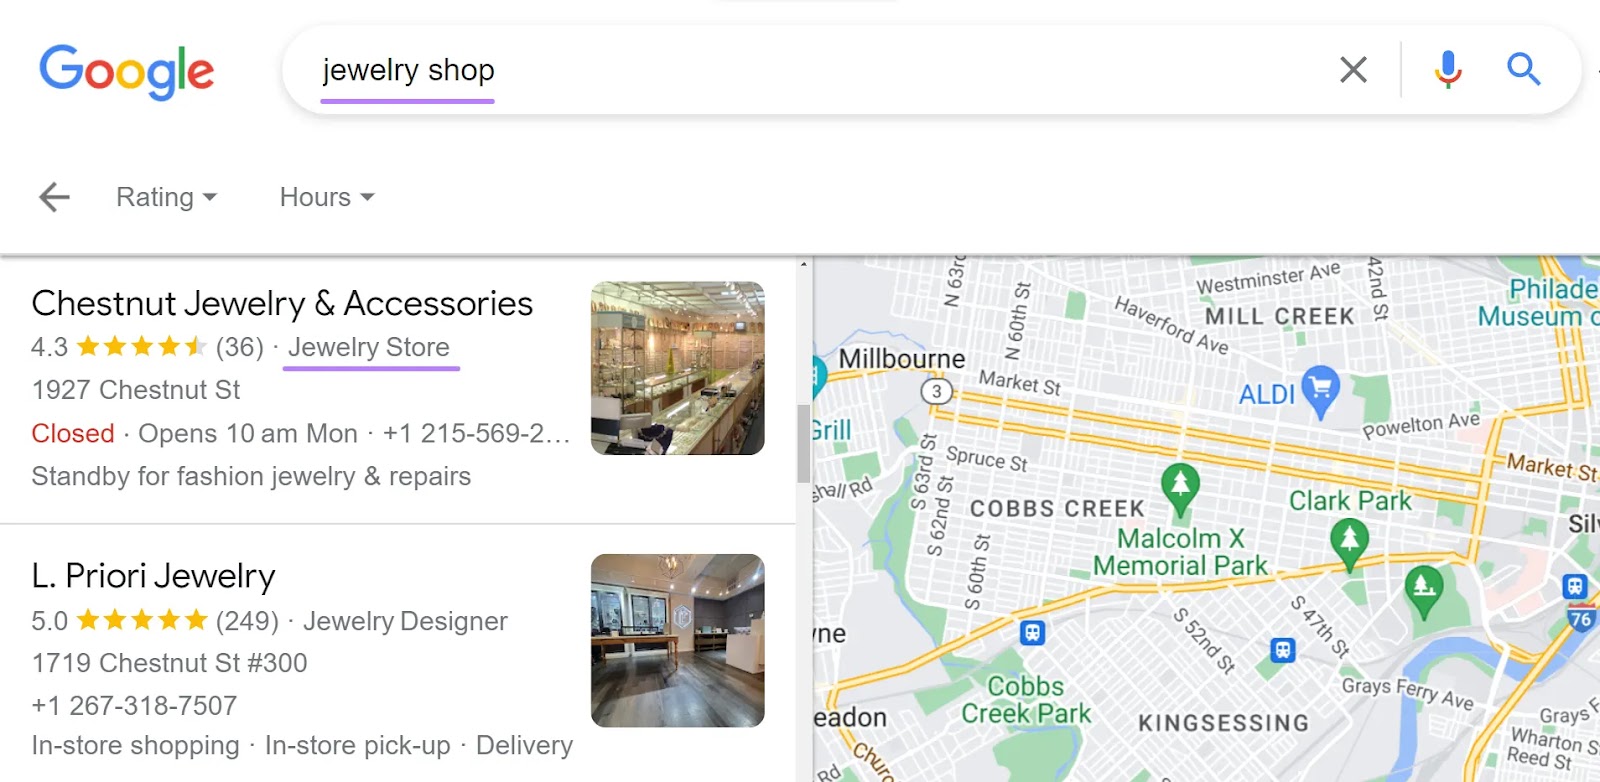 “jewelry store” category highlighted under "Chestnut Jewelry & Accessories" GBP